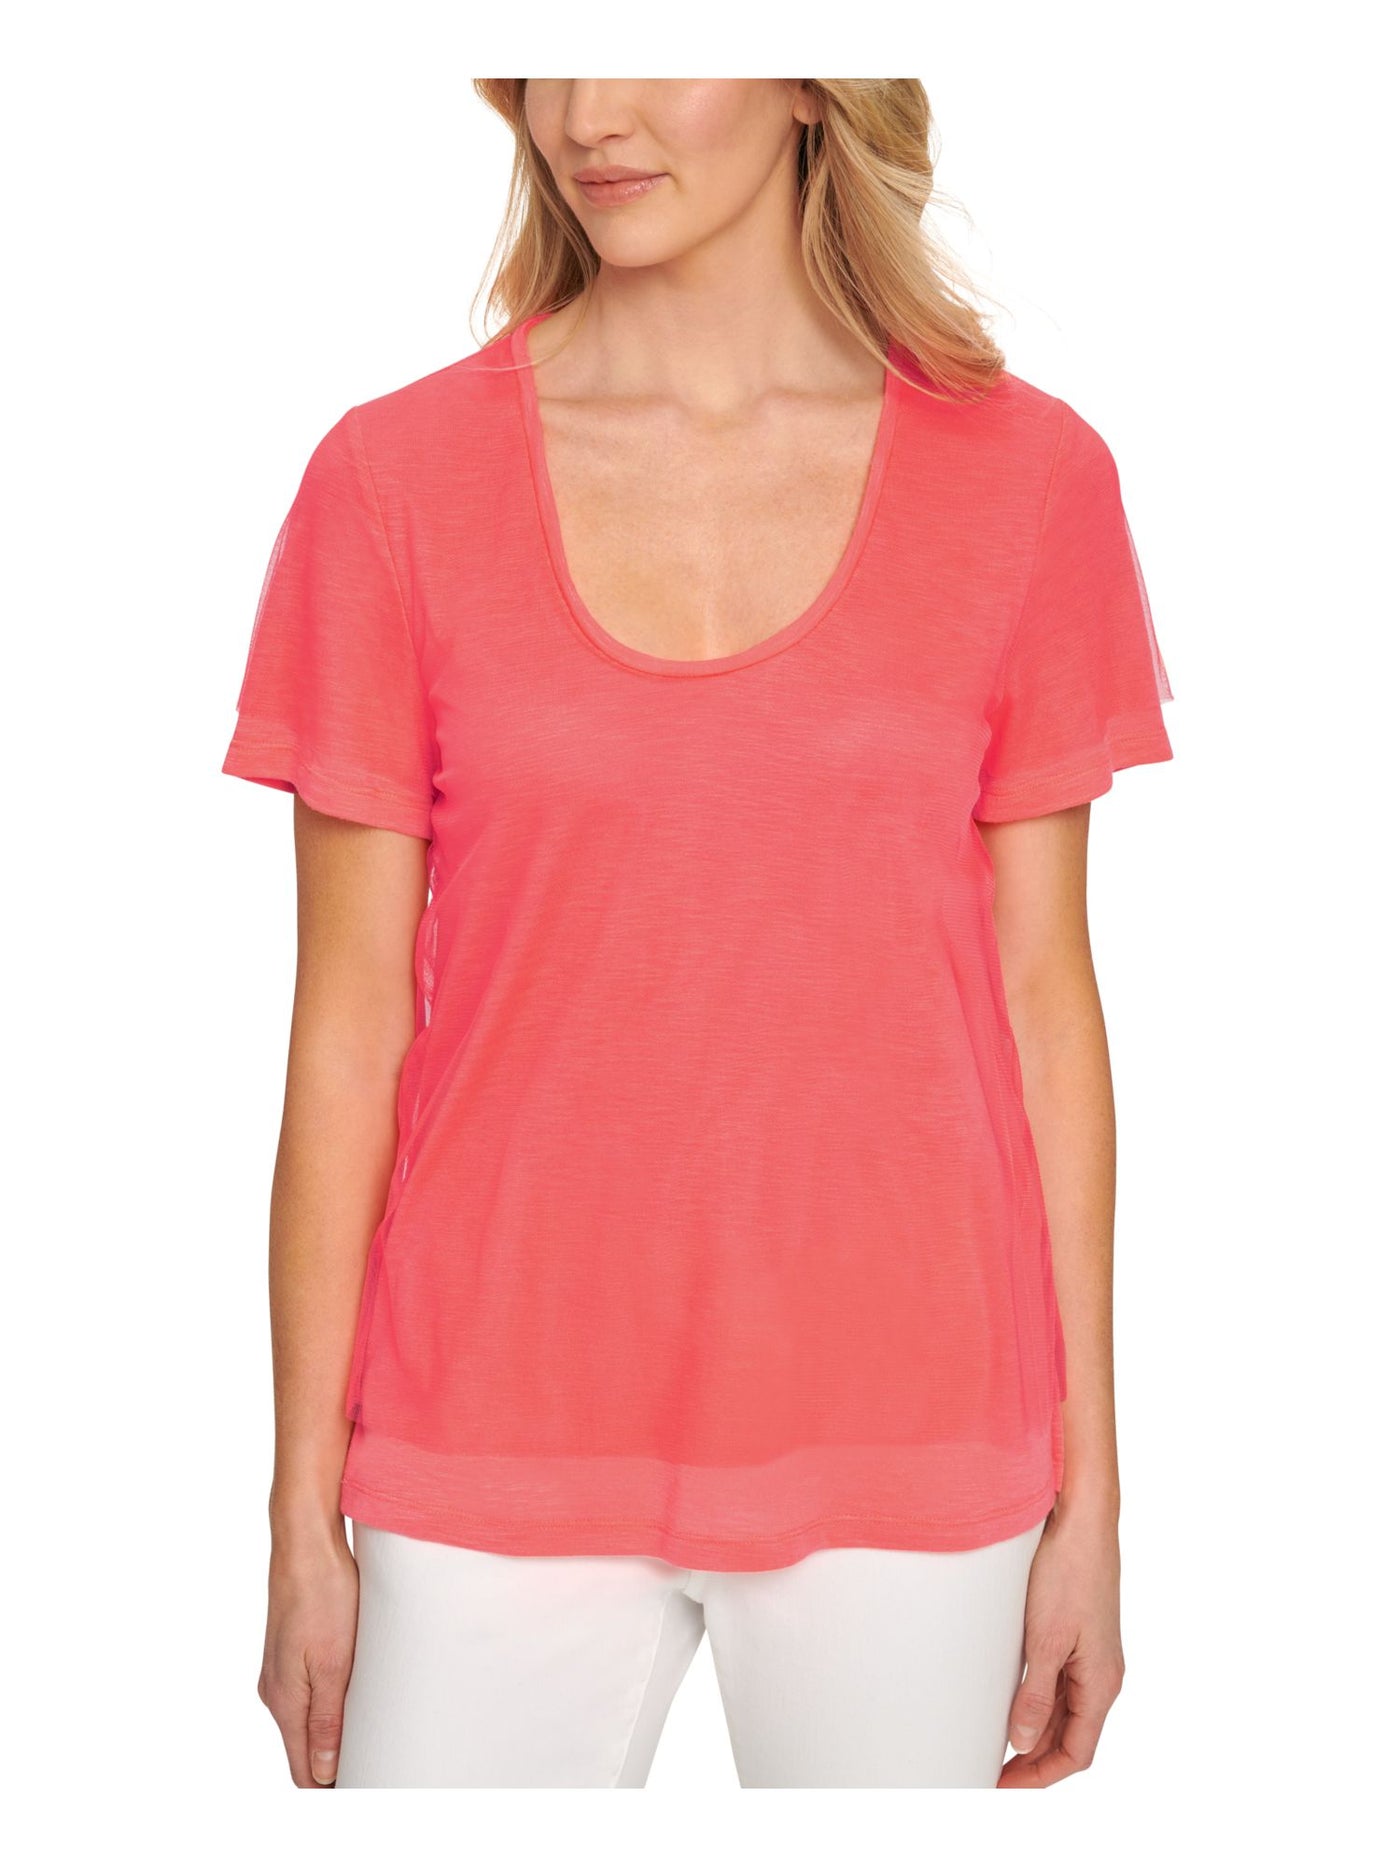 DKNY Womens Coral Textured Sheer Mesh Overlay Short Sleeve Scoop Neck Top S